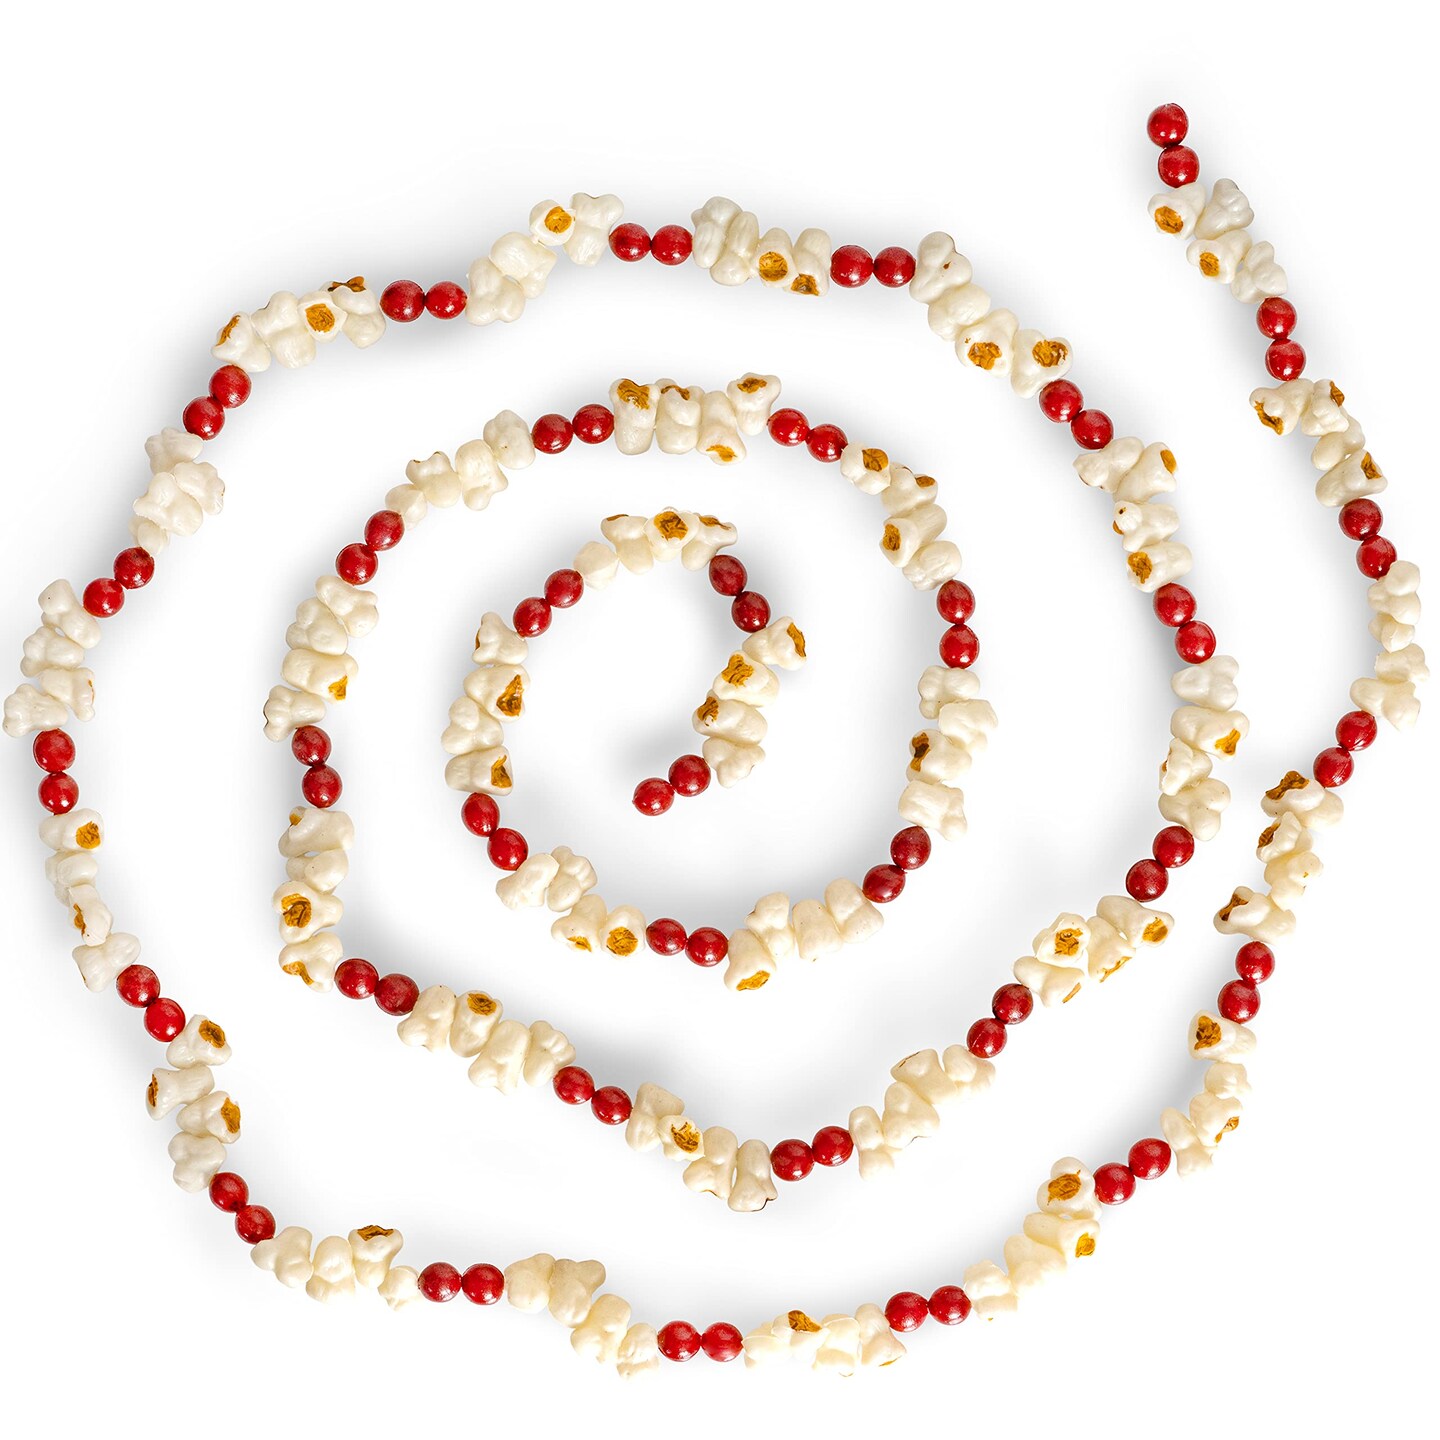 Ornativity Popcorn Cranberry Wooden Garland &#x2013; Realistic Pop Corn and Rustic Red Wood Beaded Christmas Tree Decorations Garland Bead Strand